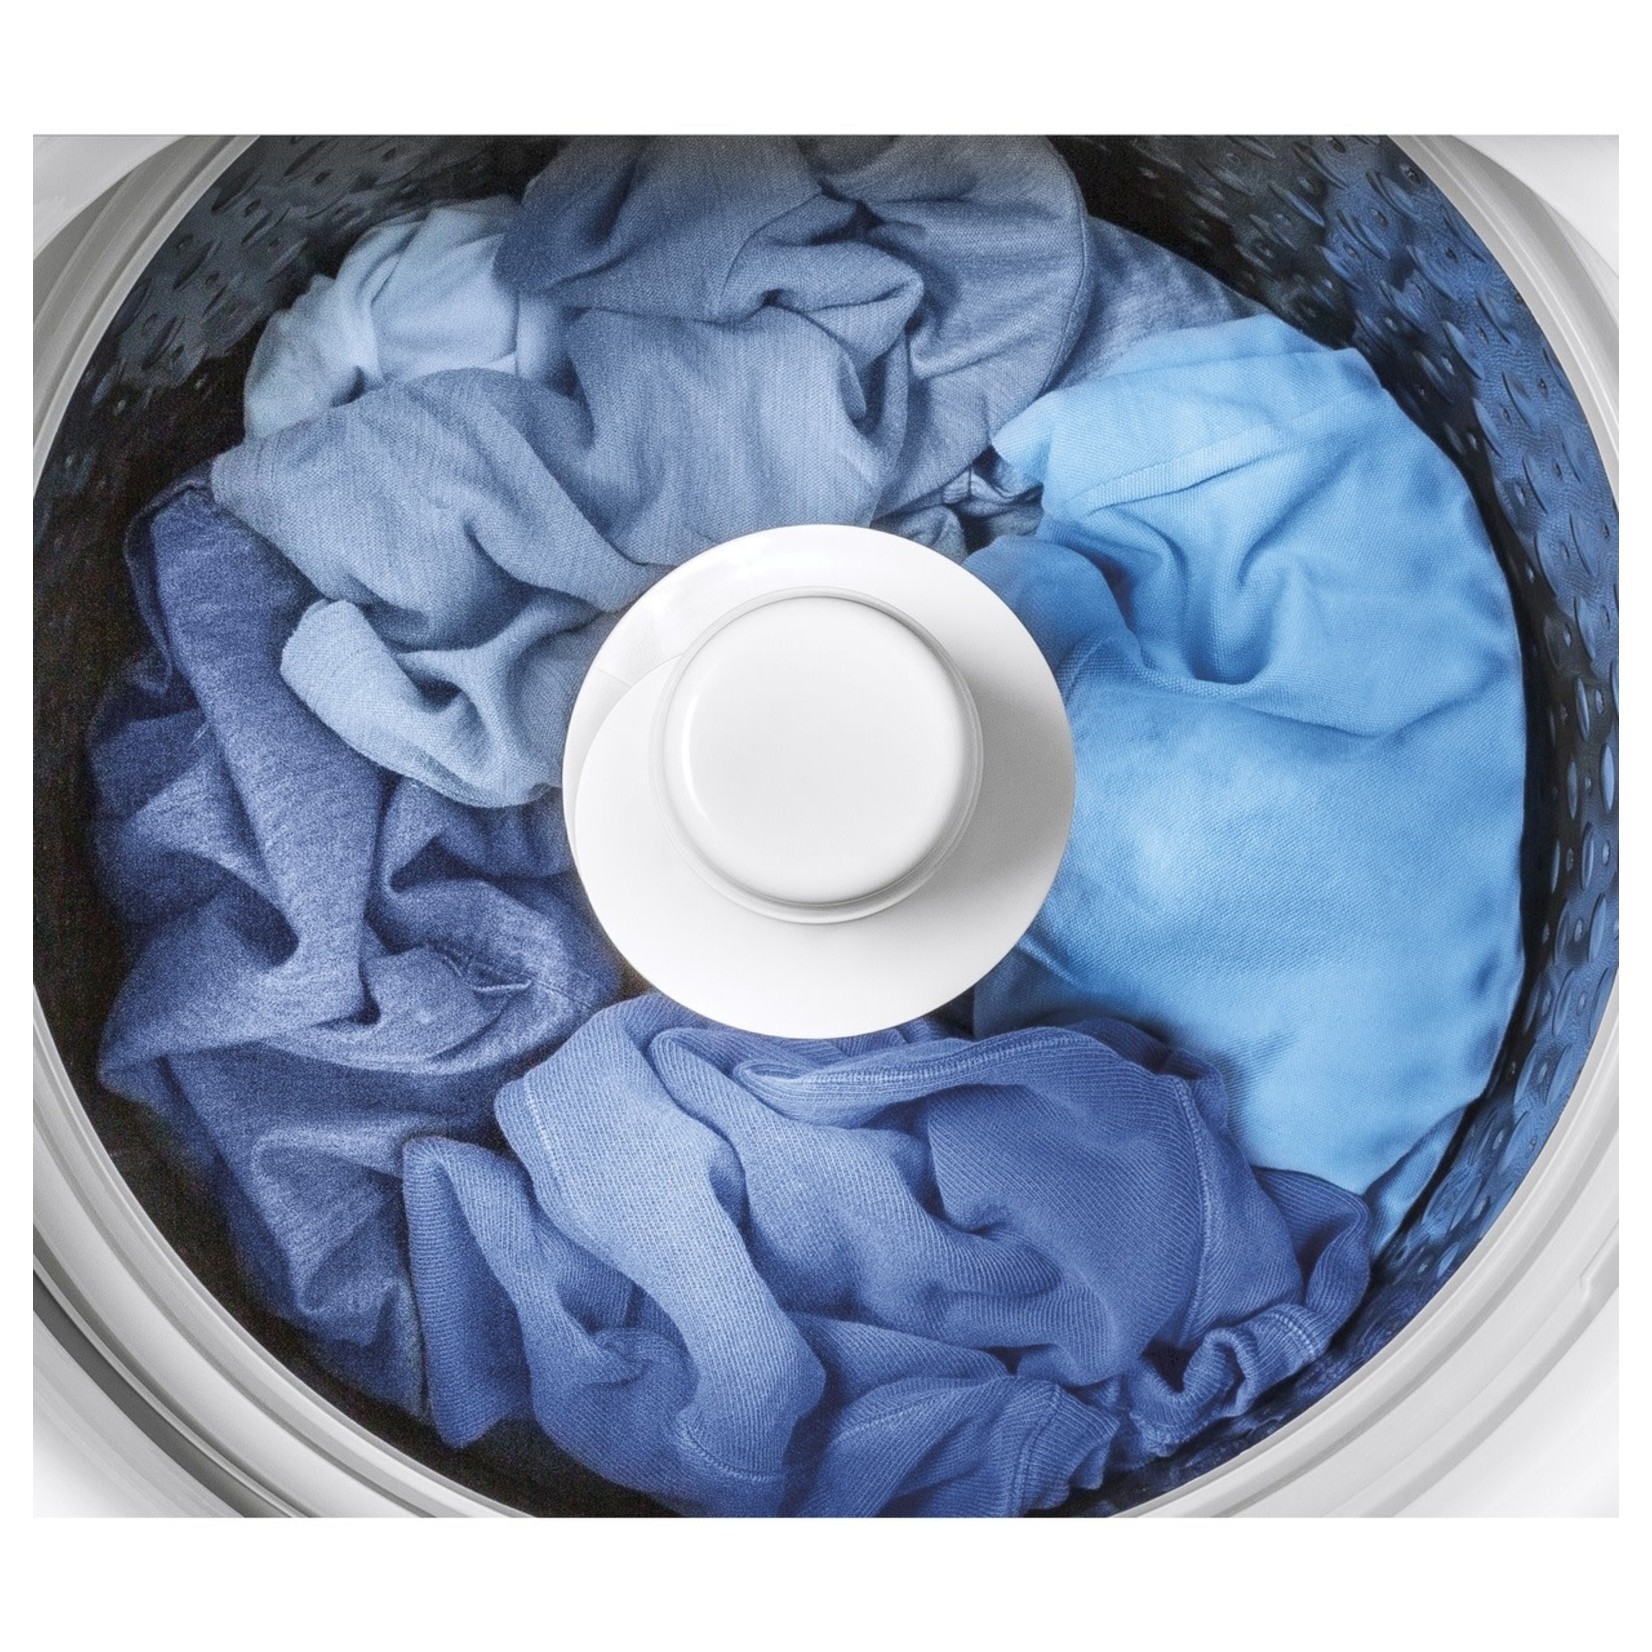 General Electric 4.6 cu. ft. Capacity Washer with Sanitize w/Oxi and FlexDispense®